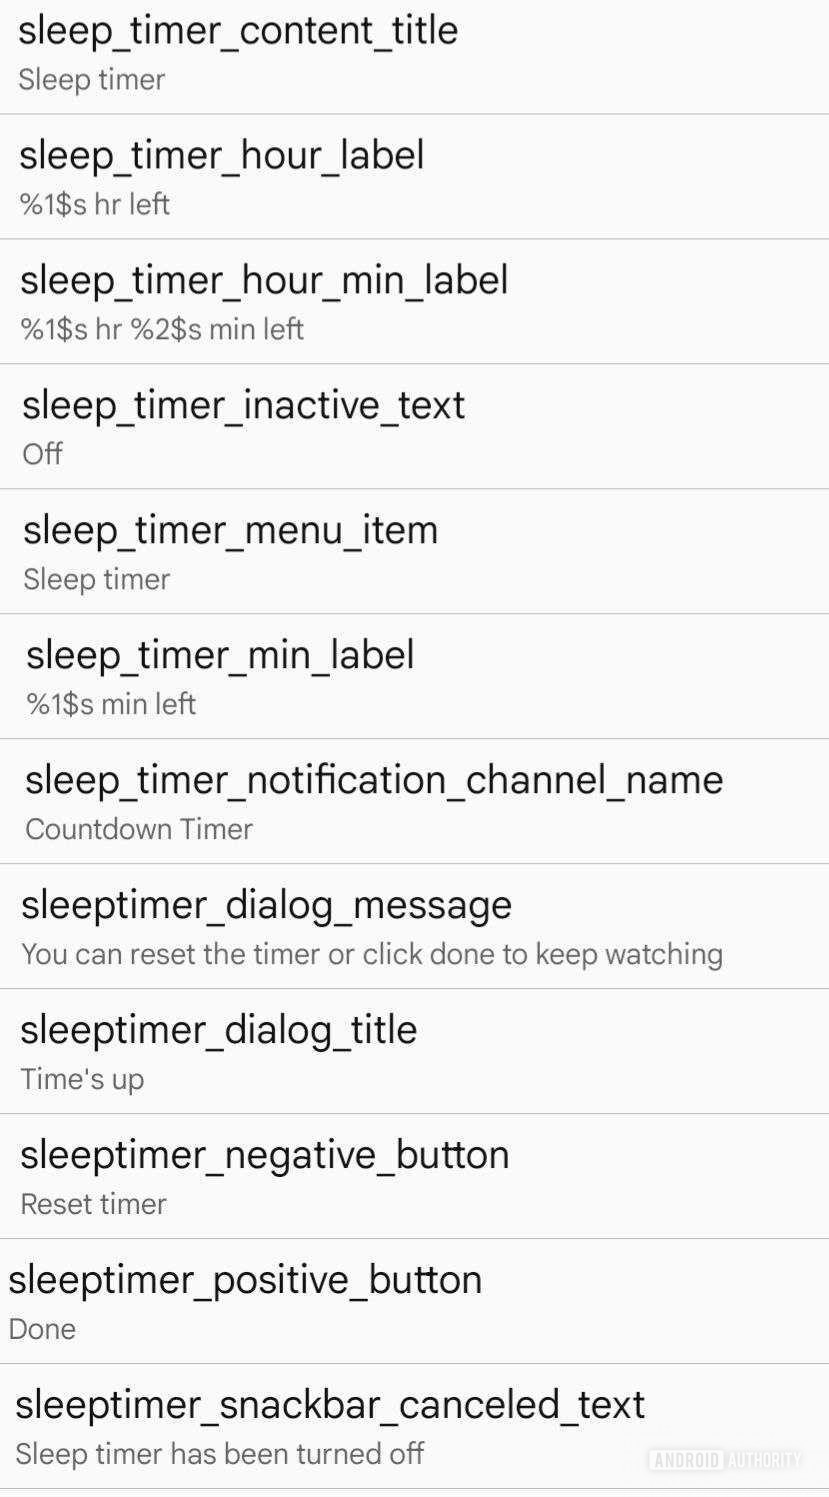  There’s also a “sleep_timer_notification_channel_name” mention, suggesting that the timer will be displayed as a notification.